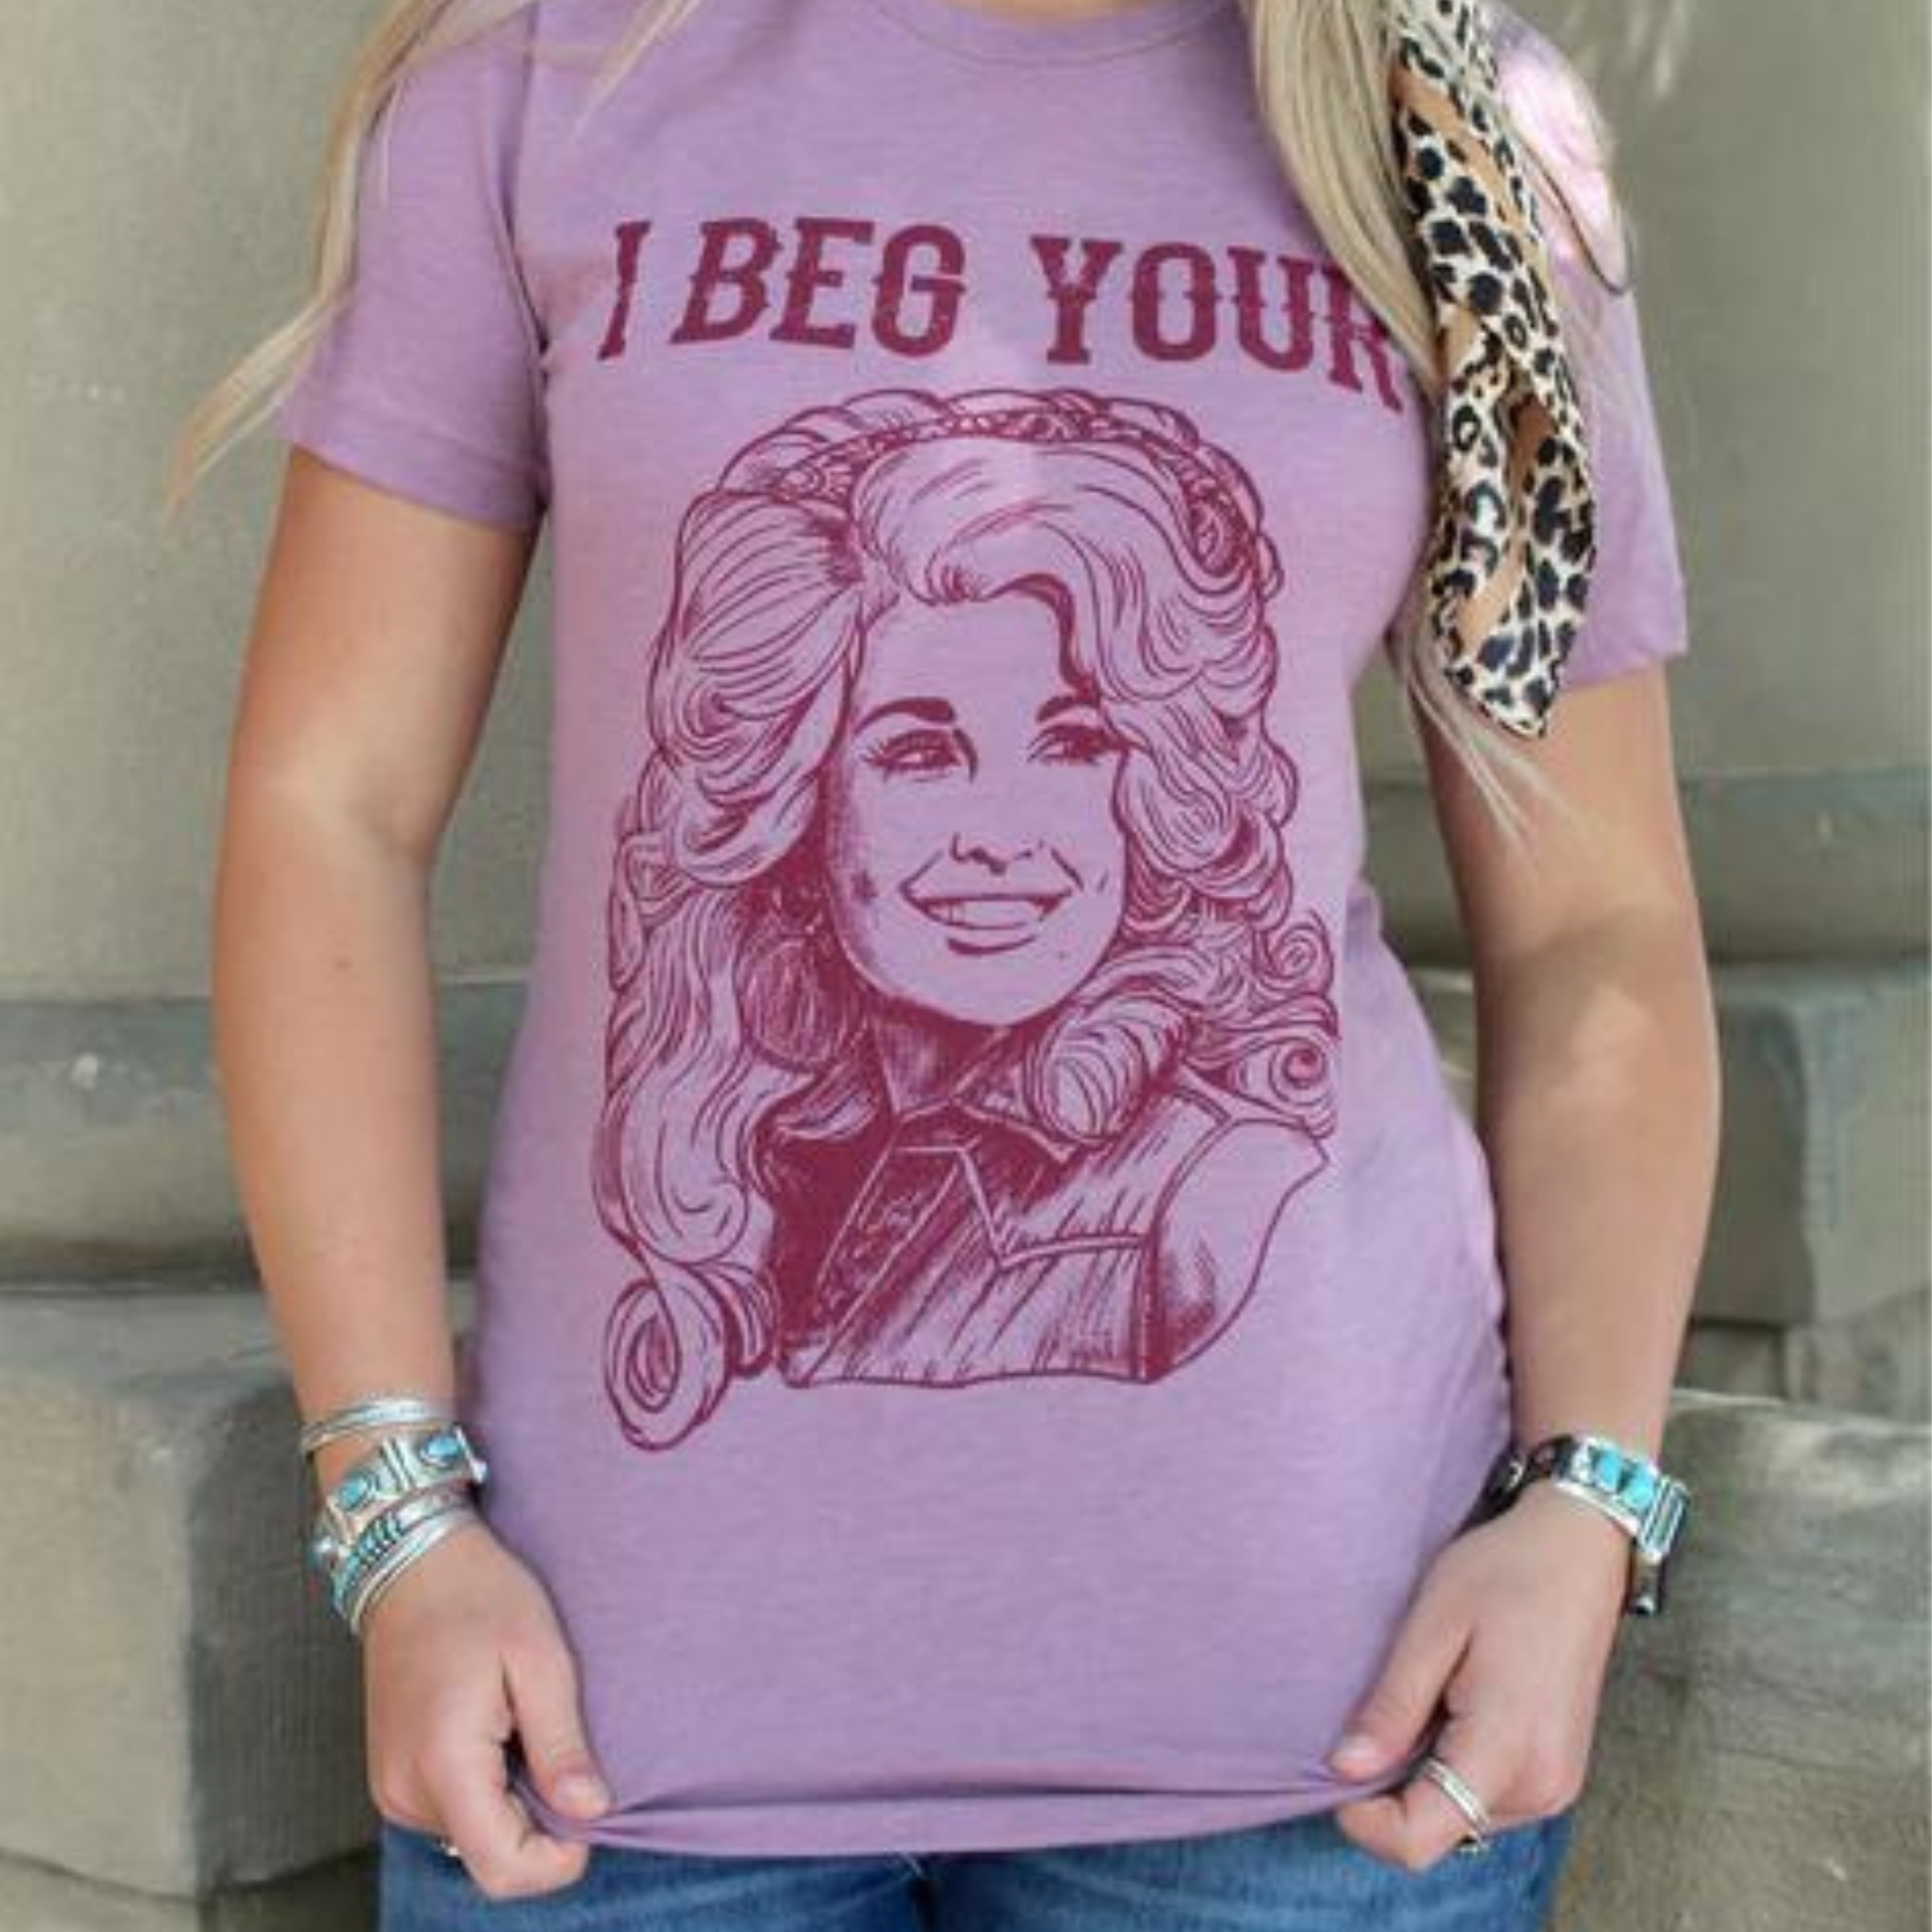 A mauve short sleeve shirt featuring a large graphic of country singer Dolly Parton in dark purple with the words "I beg your" above the image. Item is pictured on a grey background